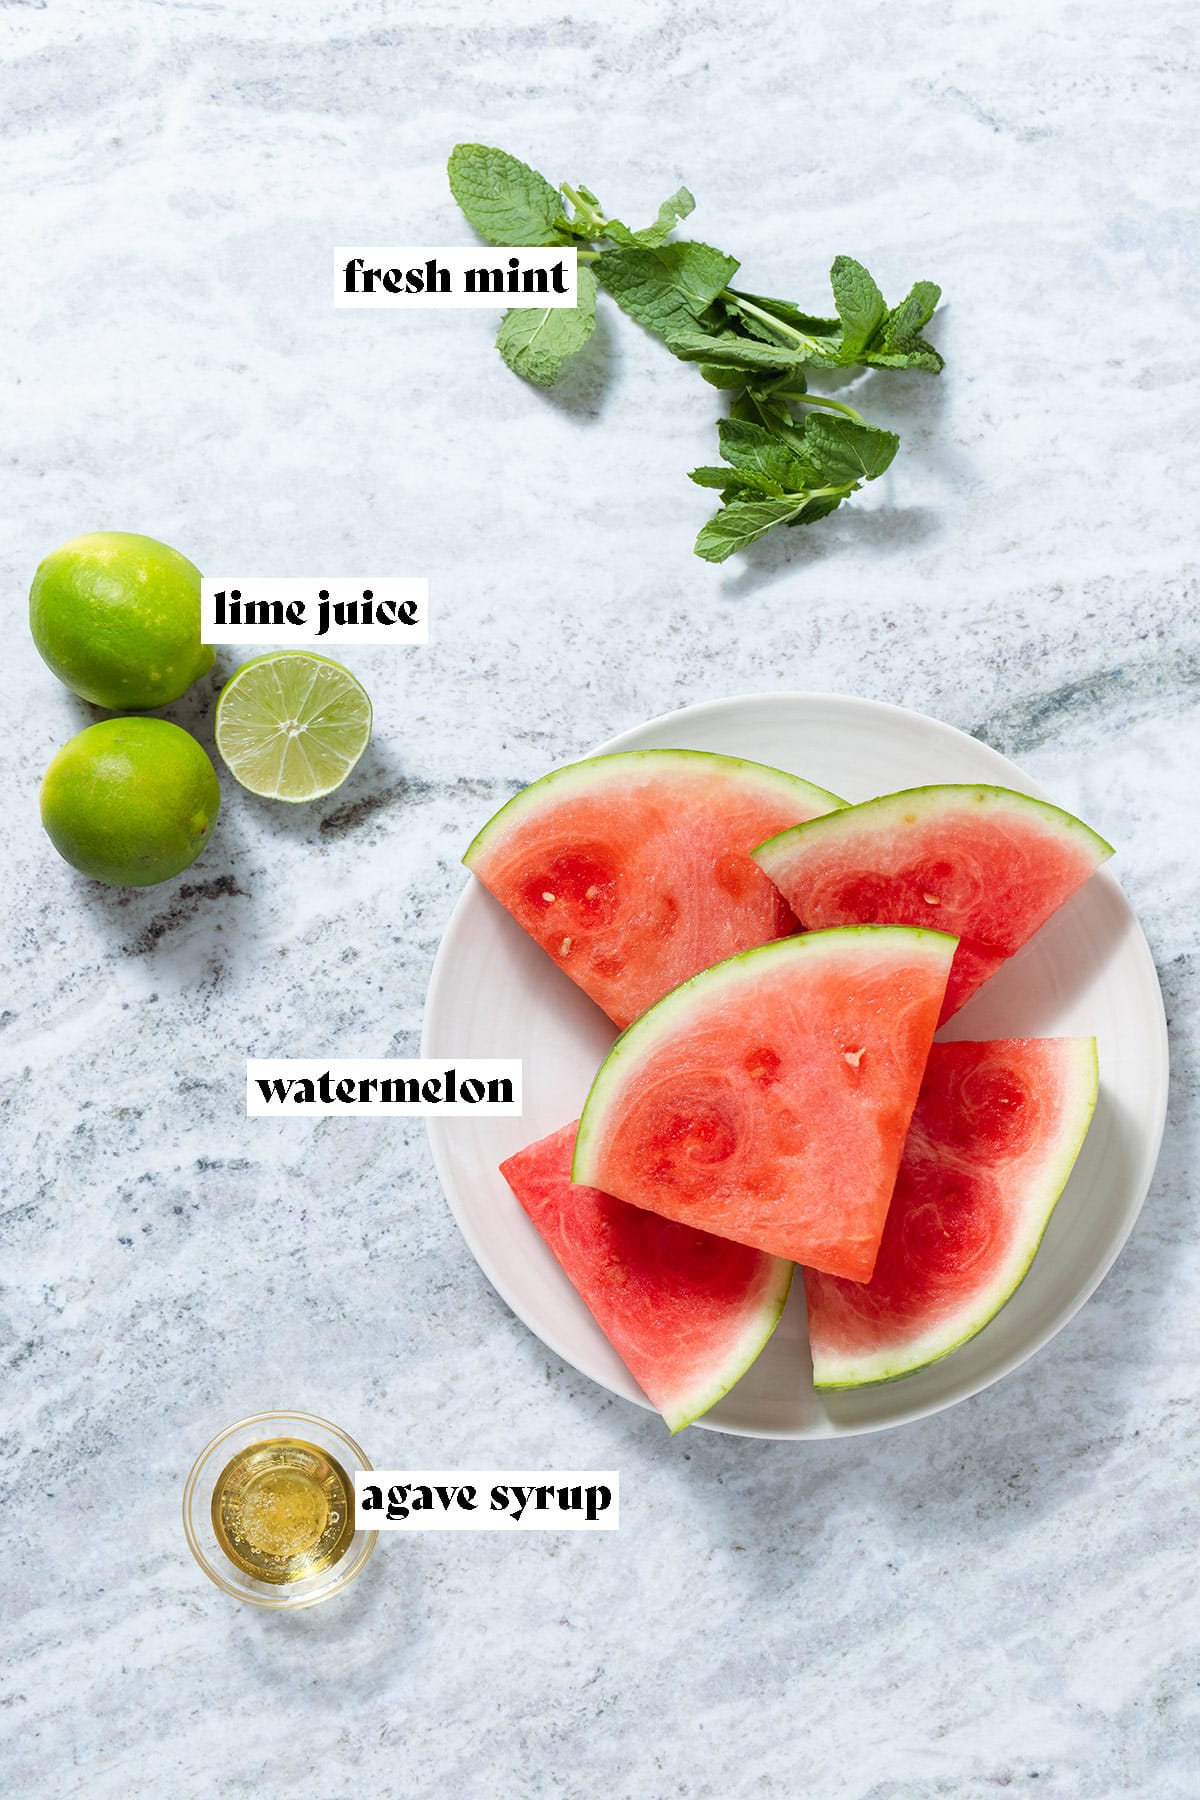 Slices of watermelon, fresh mint, lime, and agave laid out on grey stone background with text overlay.